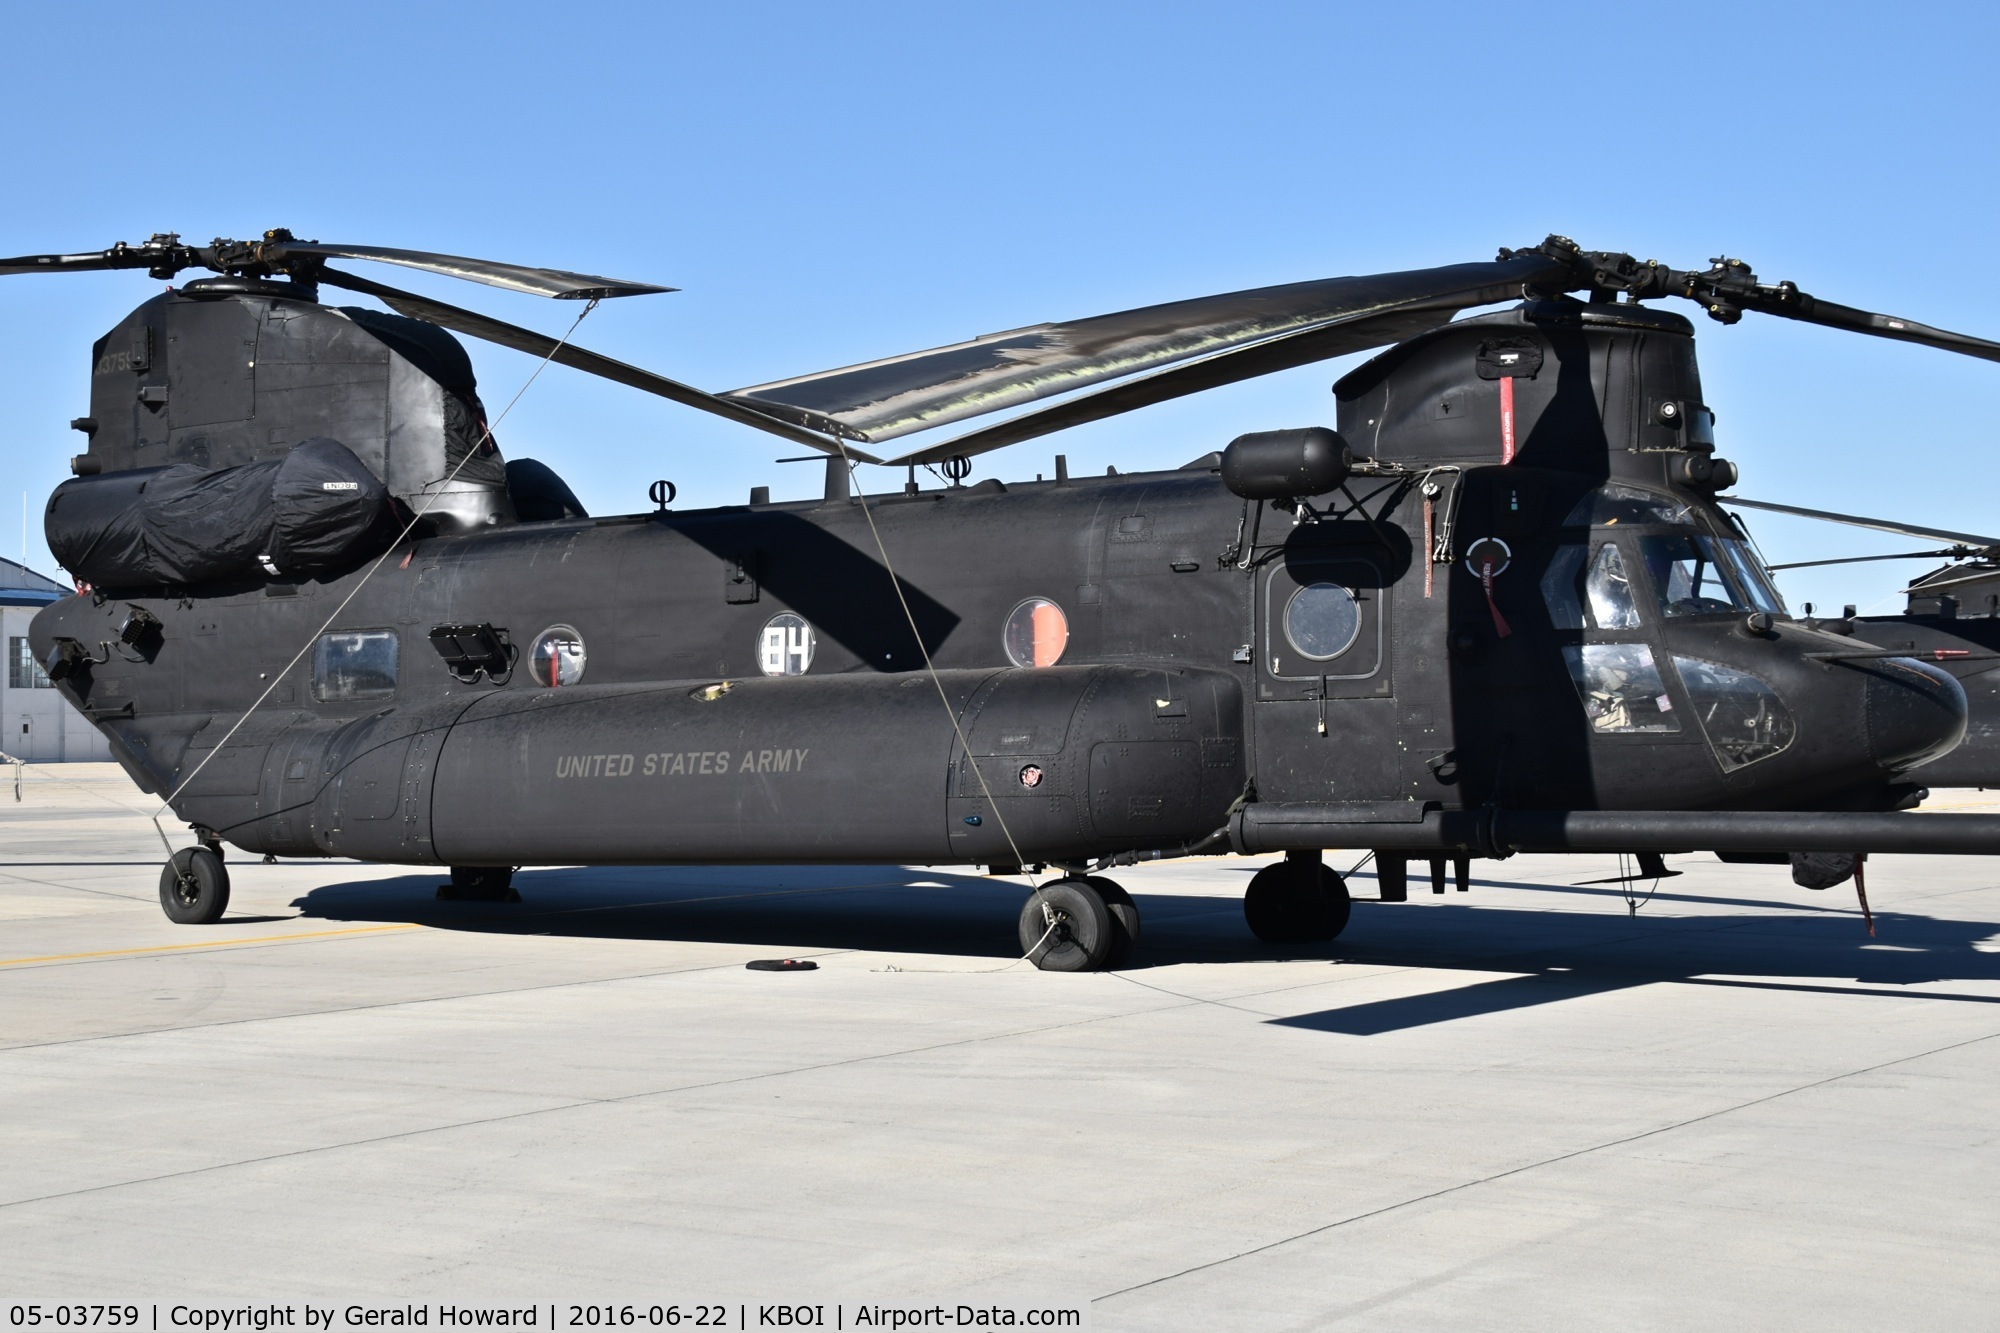 05-03759, 2005 Boeing MH-47G Chinook C/N M.3759, U.S. Army 160th Special Operations Aviation Regiment (SOAR), “Night Stalkers” 4th BN, Joint Base Lewis-McChord, WA